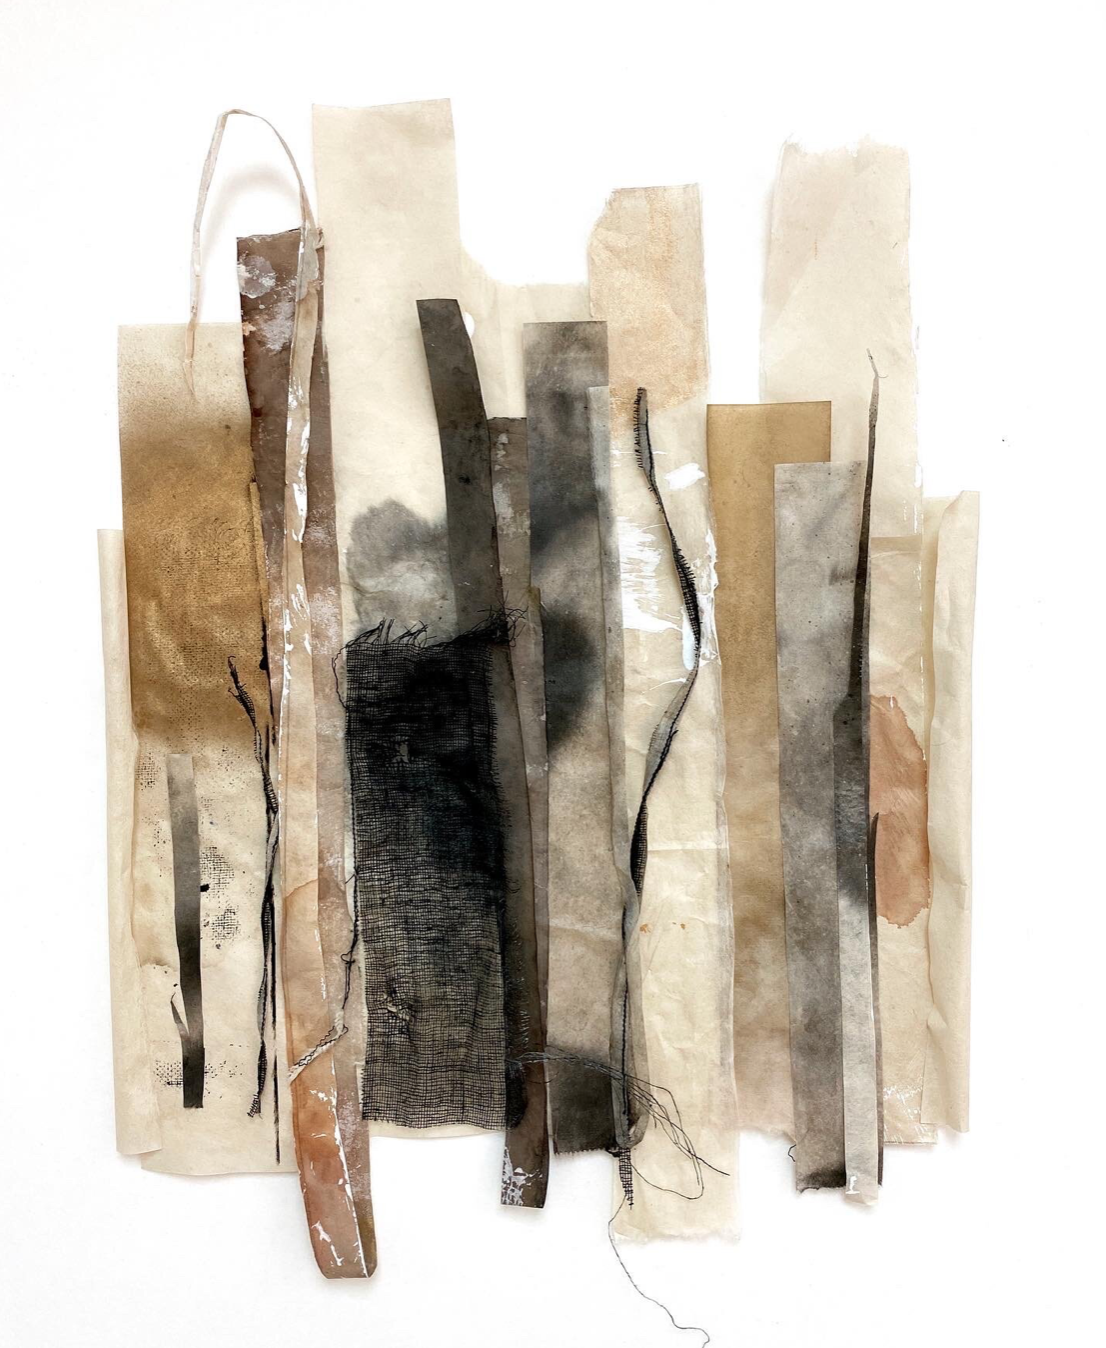 collage of verical papers of varying colors and textures that look like raw and burnt sticks and ribbons